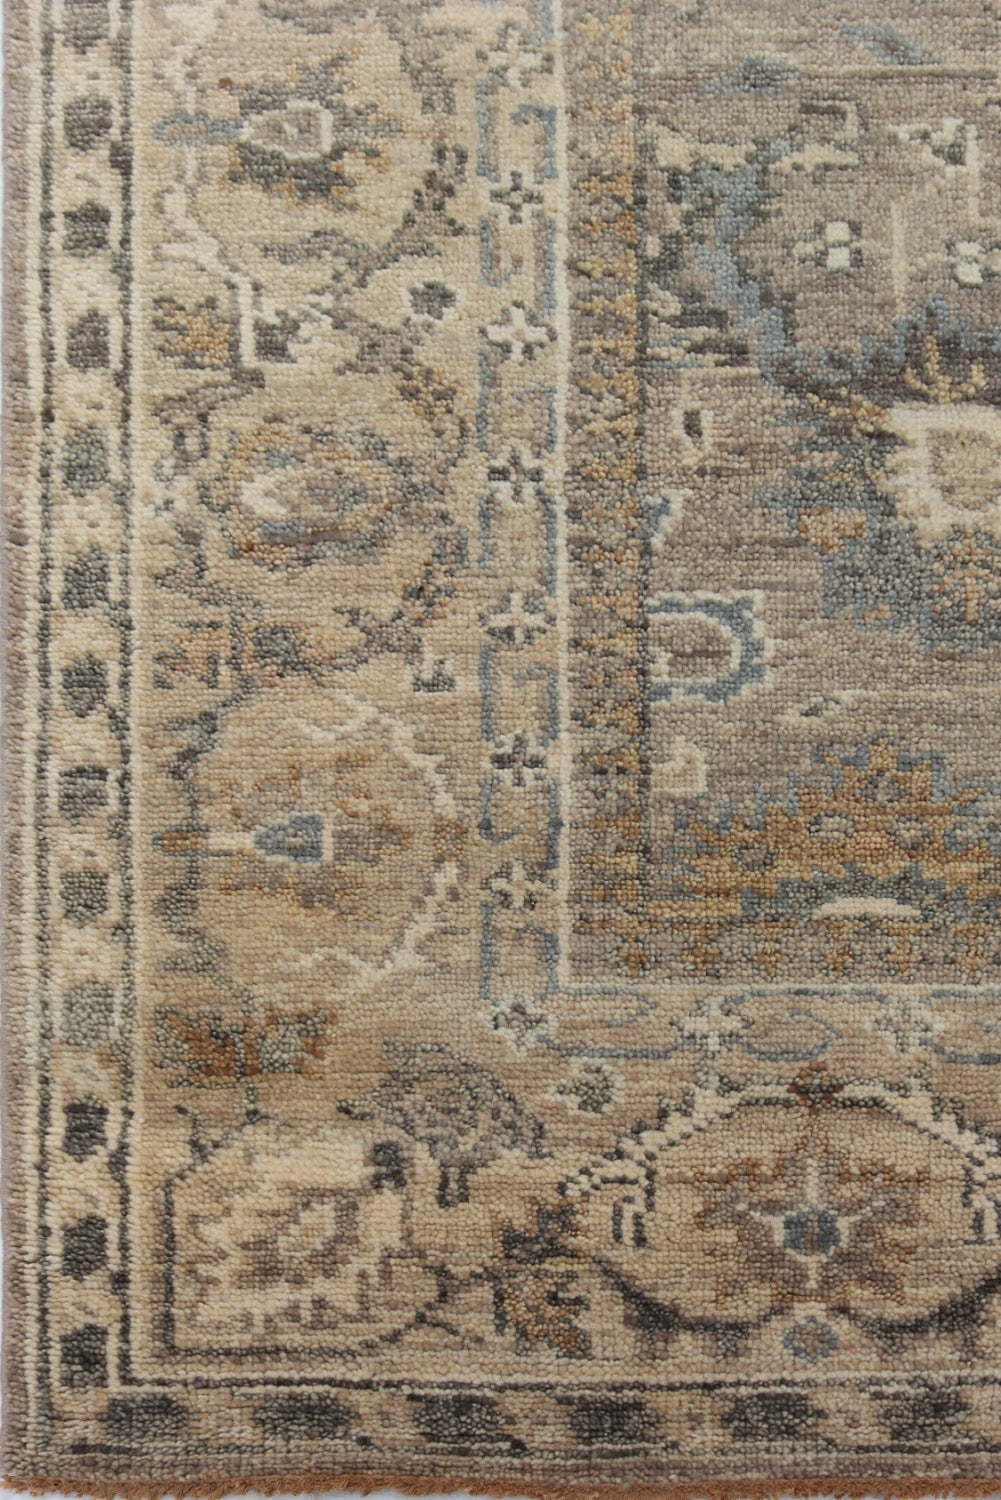 Sultanabad 6 Handwoven Traditional Rug, J71711